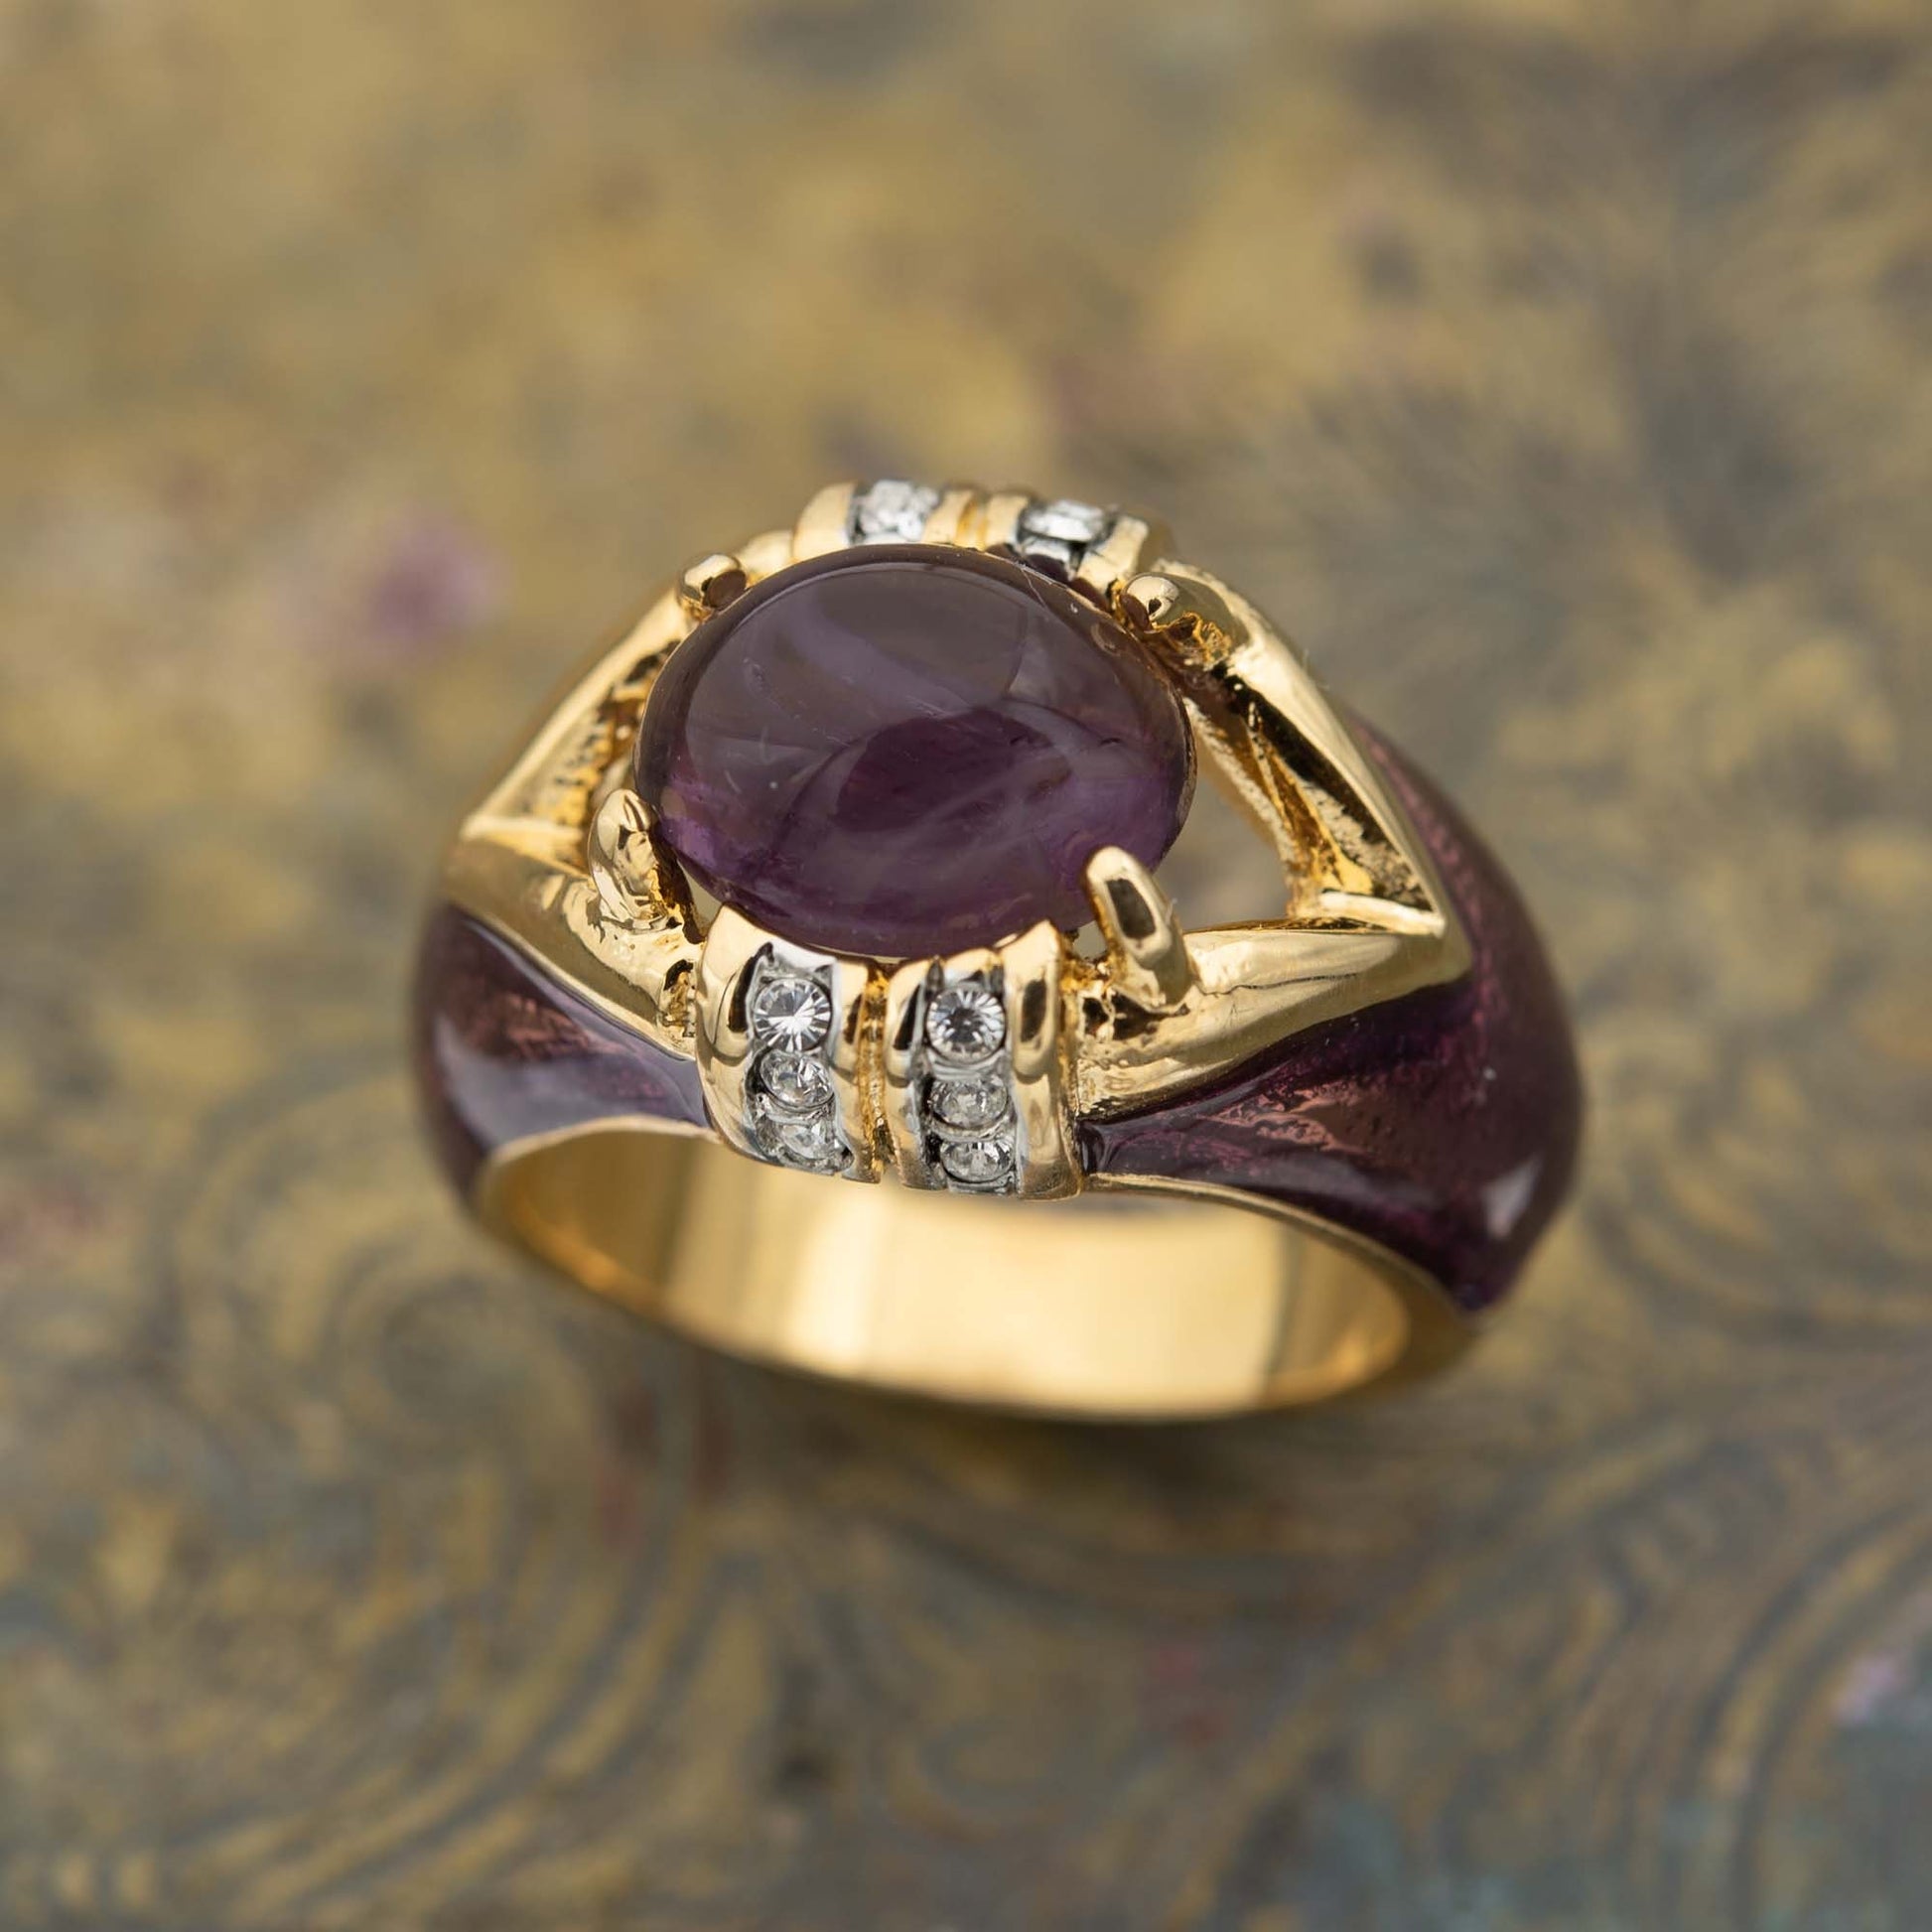 Vintage Ring 1990's Amethyst and Clear Crystals Dome Ring Womans Antique Jewlery - Limited Stock - Never Worn